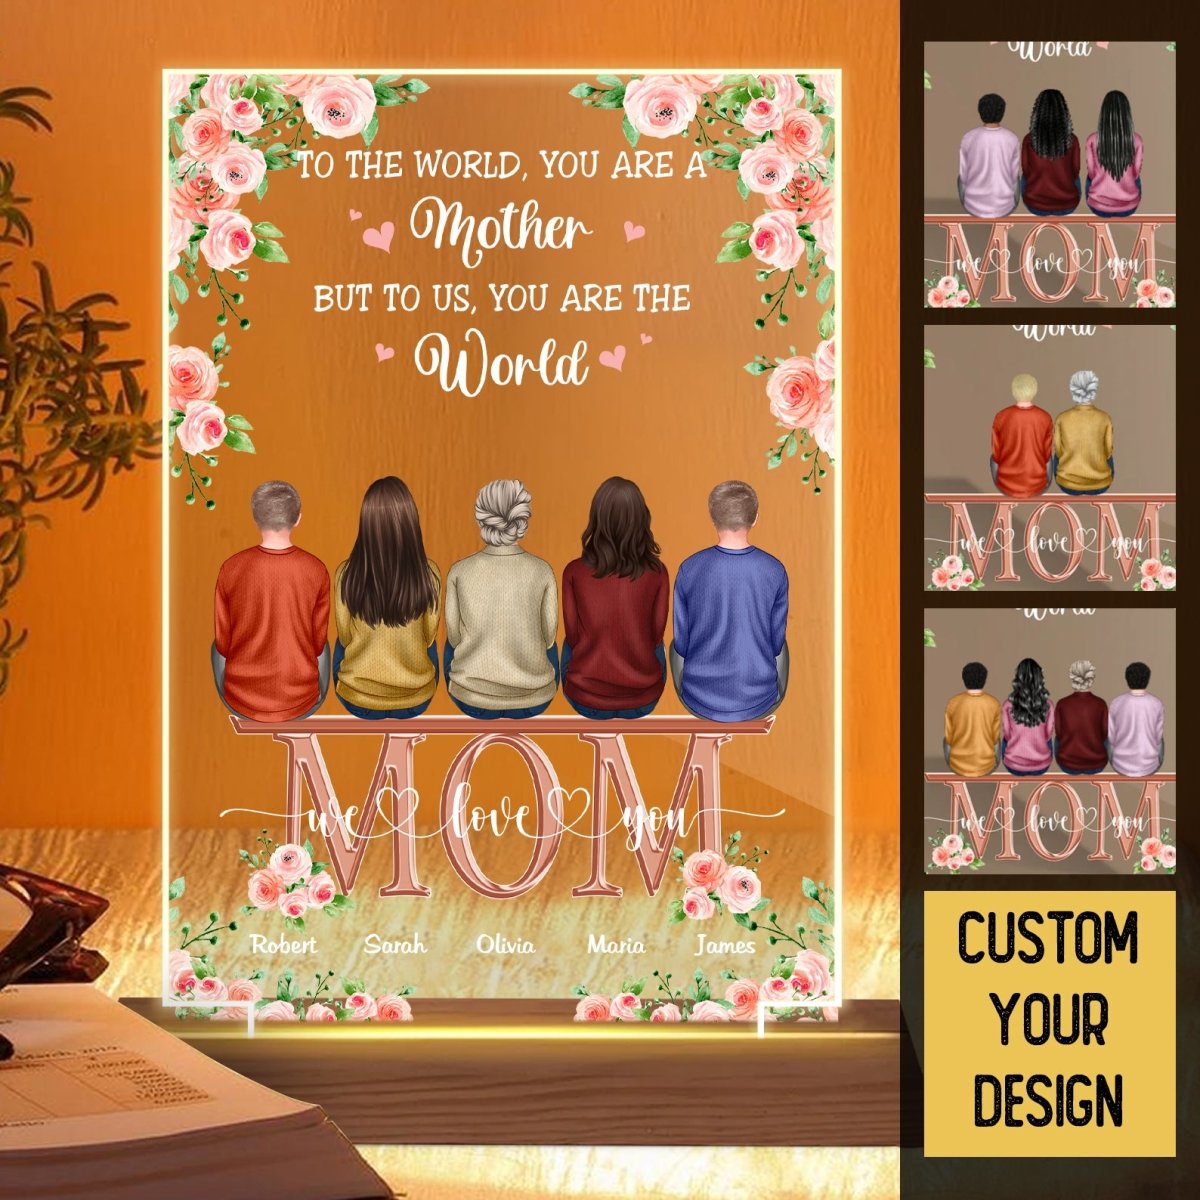 Personalized Christmas Gifts for Mom From Daughter the Best Days